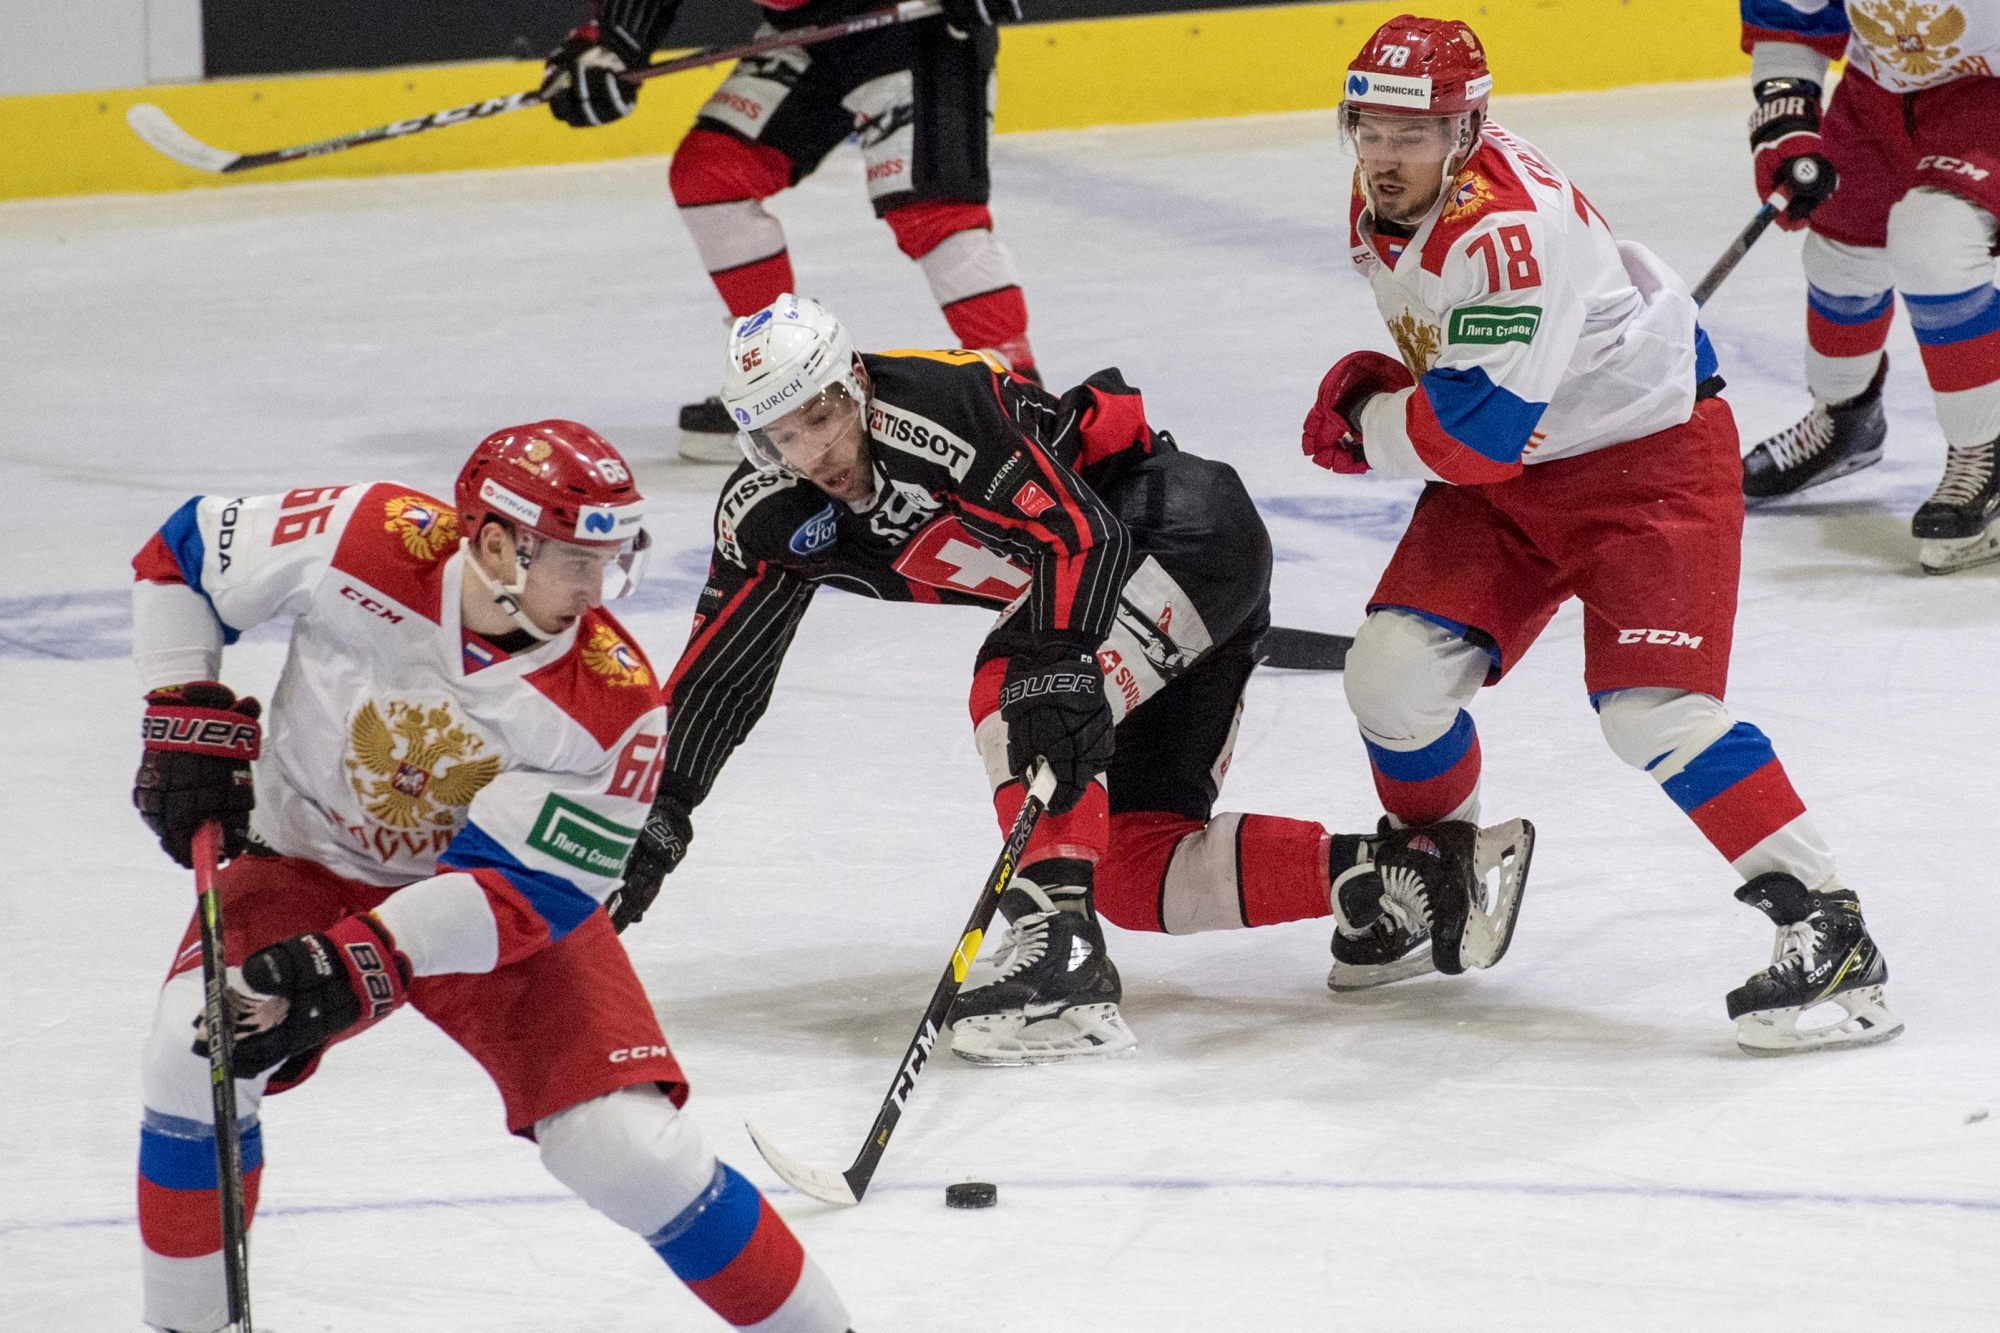 Switzerland's player Romain Loeffel, centre, and Russia's player Aleksei Kruchinin, right, during a international ice hockey game between Switzerland and Russia Olympic Team, at the Lucerne Cup in Lucerne, Switzerland, on Friday, December 14, 2018. (KEYSTONE/Urs Flueeler) SWITZERLAND HOCKEY LUCERNE CUP